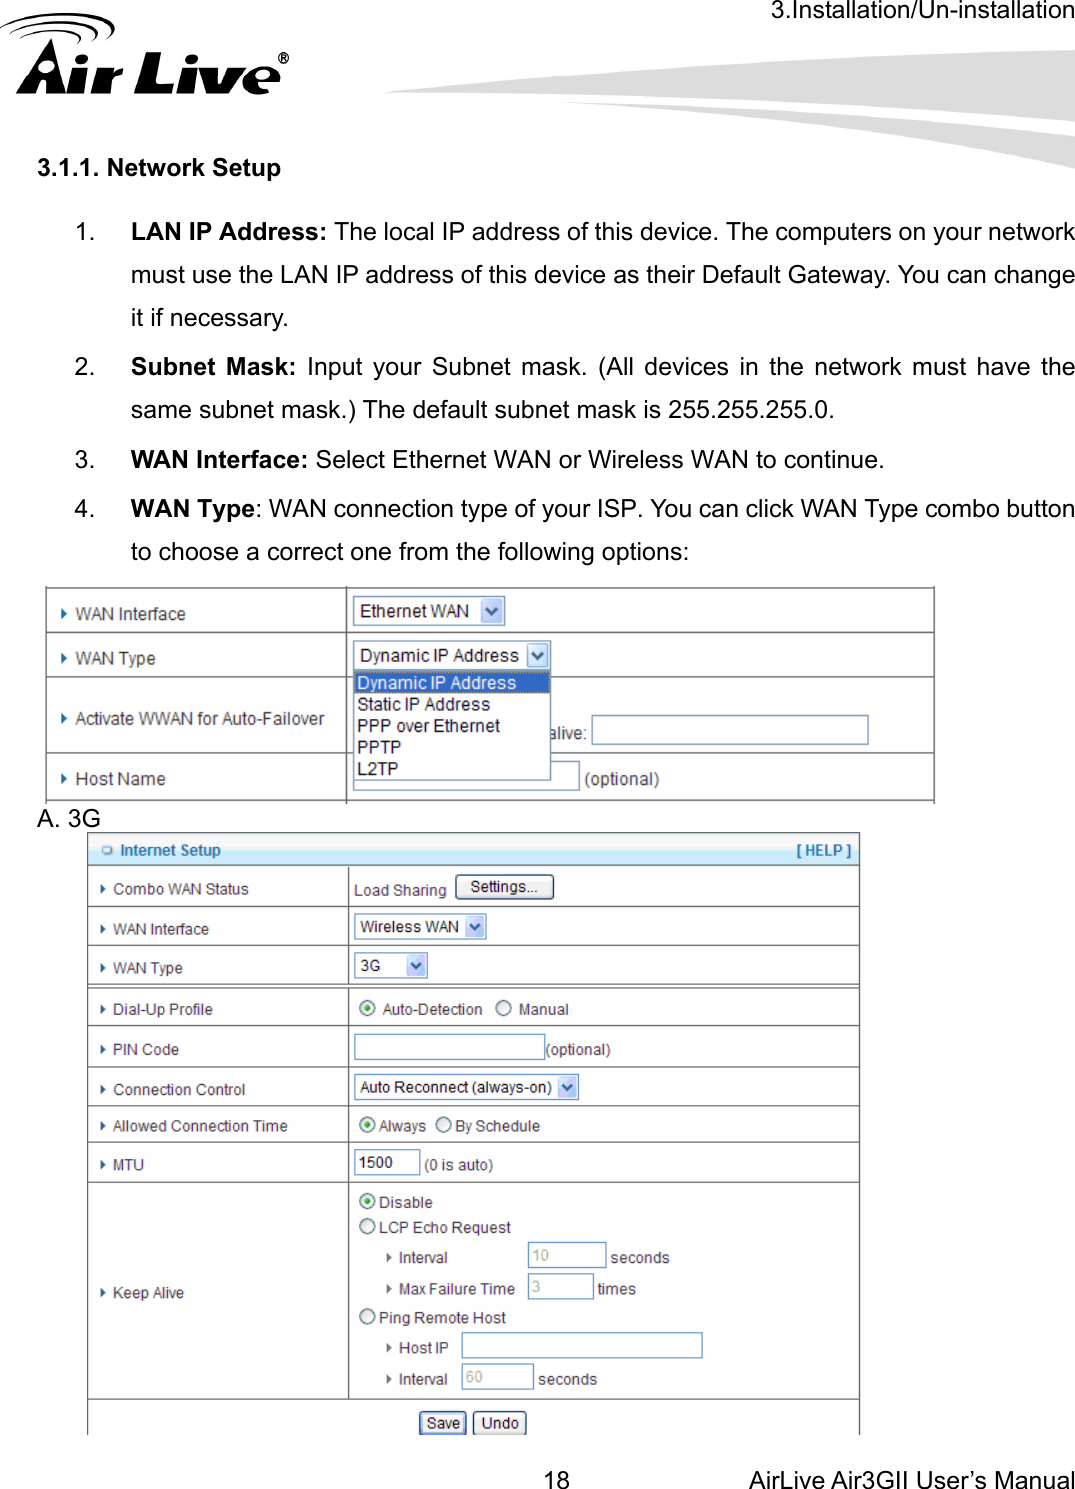 3.Installation/Un-installation AirLive Air3GII User’s Manual 18 3.1.1 etup  1ddress: The  omputers on  ur network  the LAN IP a  Gateway. You can change it if necessary. k: Input your Subnet mask. (All devices in the network must have the ct Ethernet WAN or Wireless WAN to continue. 4.  WAN Type: WAN connection type of your ISP. You can click WAN Type combo button to choose a correct one from the following options:    . Network S.  LAN IP Amust uselocal IP address of this device. The cddress of this device as their Defaultyo2.  Subnet Massame subnet mask.) The default subnet mask is 255.255.255.0. 3.  WAN Interface: Sele A. 3G  